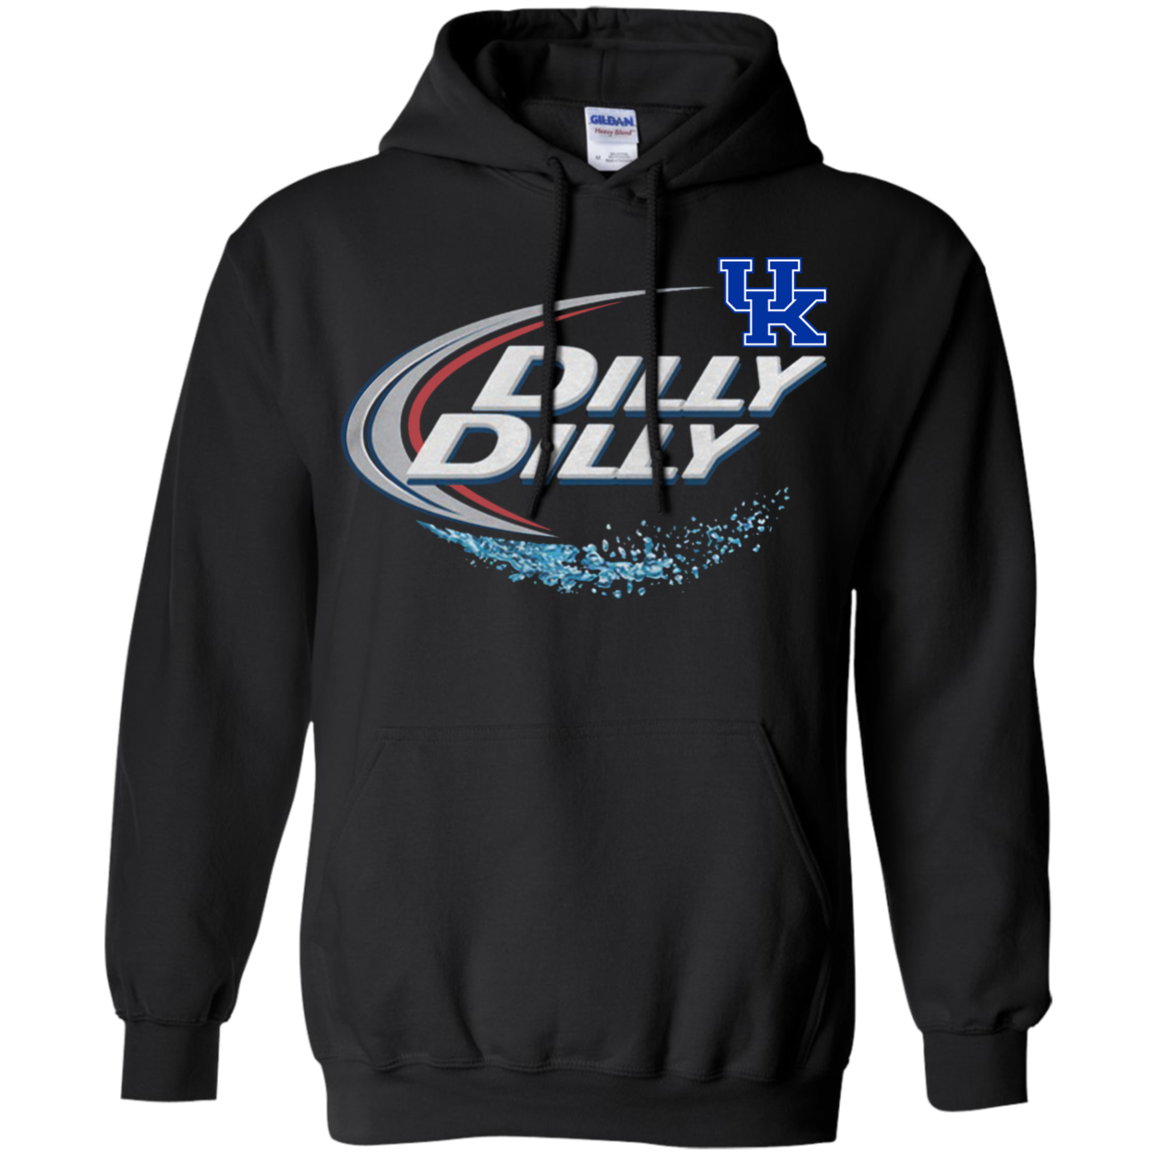 Shop From 1000 Unique Kentucky Wildcats Dilly Dilly - Tula Store Shirts